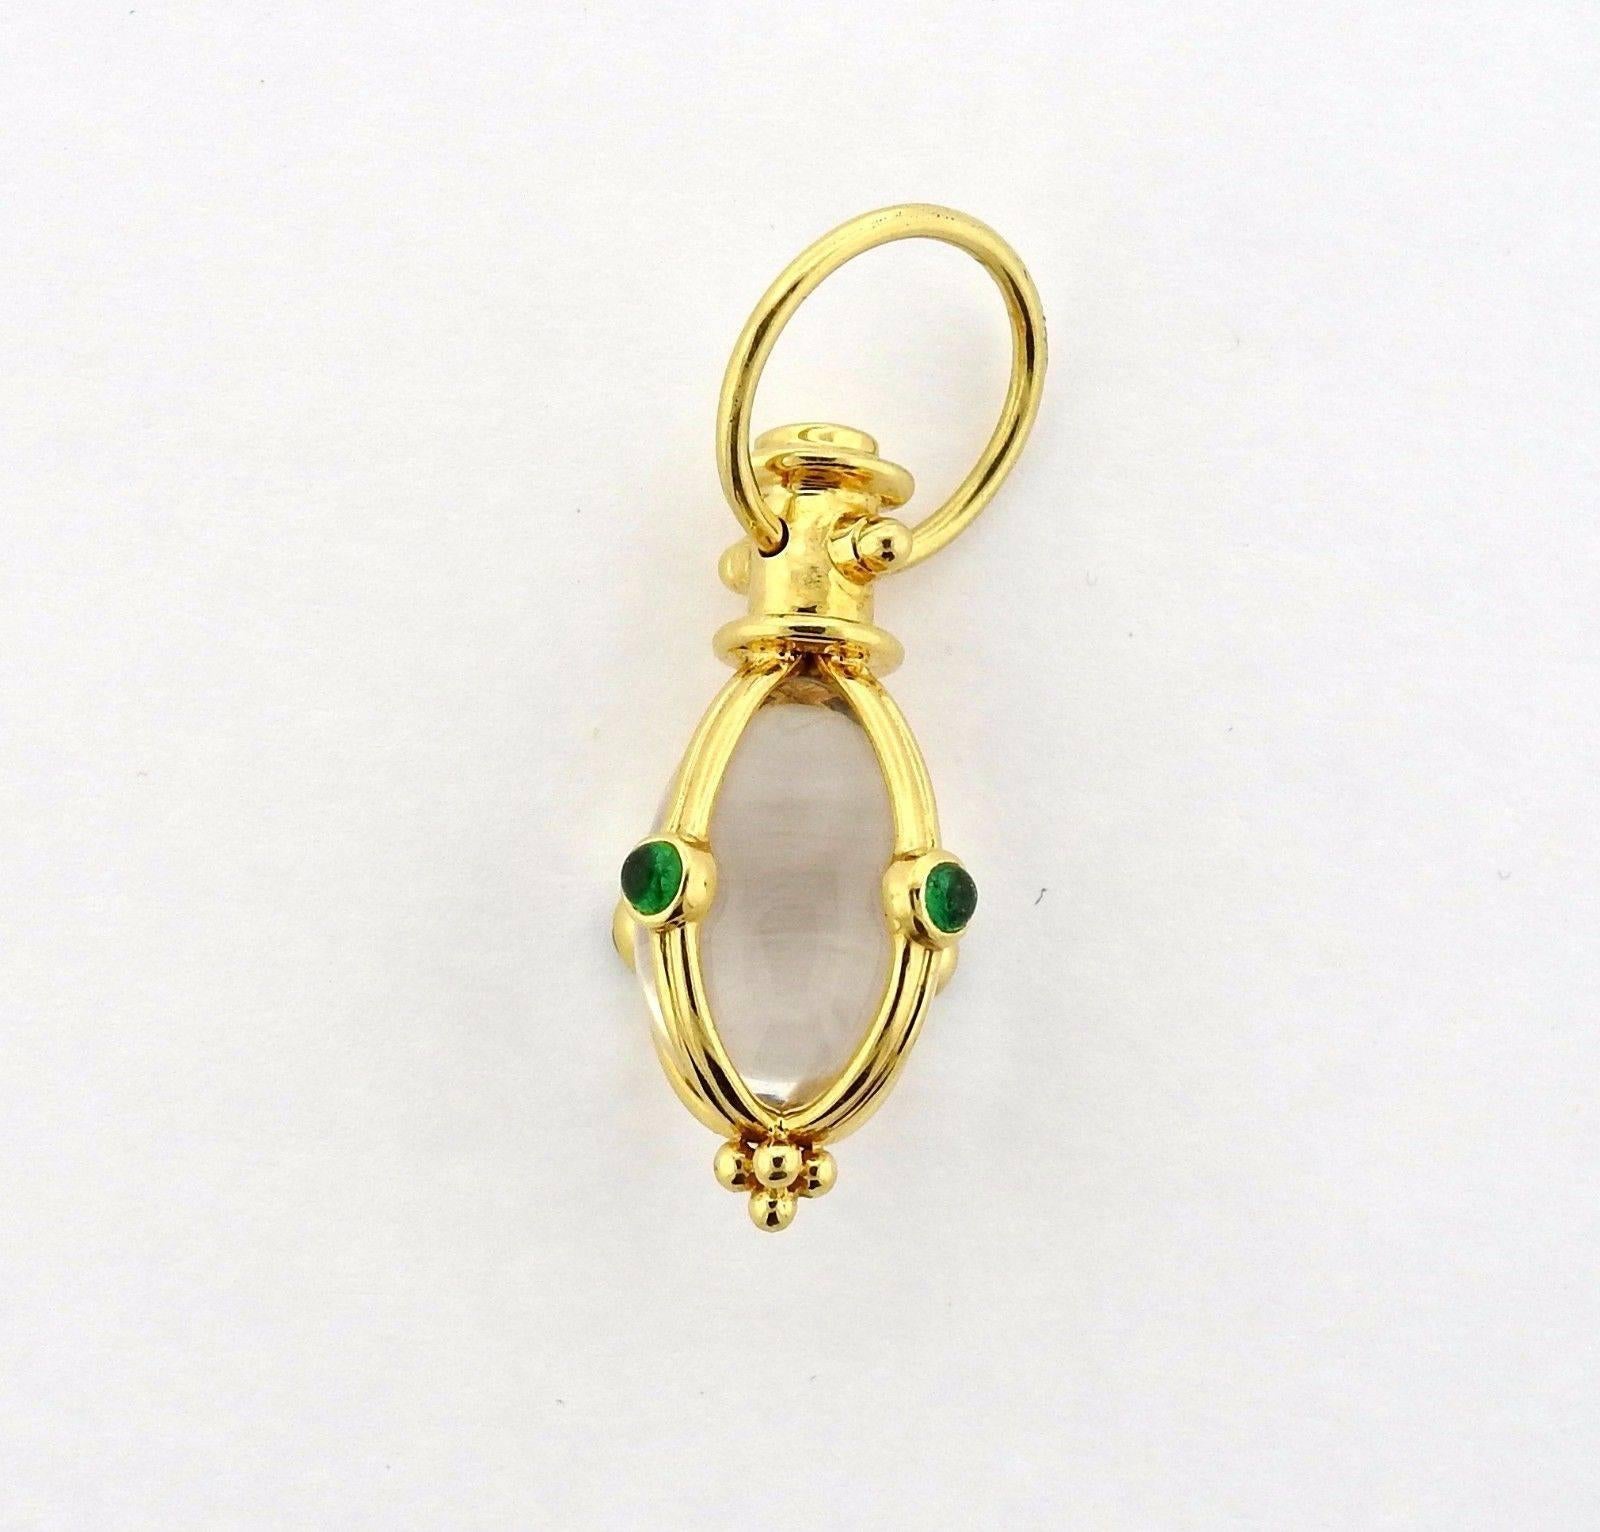 An 18k yellow gold rock crystal amulet set with emeralds. The pendant measures 38mm (including bale) x 16.4mm.  The weight of the piece is 8.2 grams. Marked: Temple Mark, 750.  The retail is $2100.